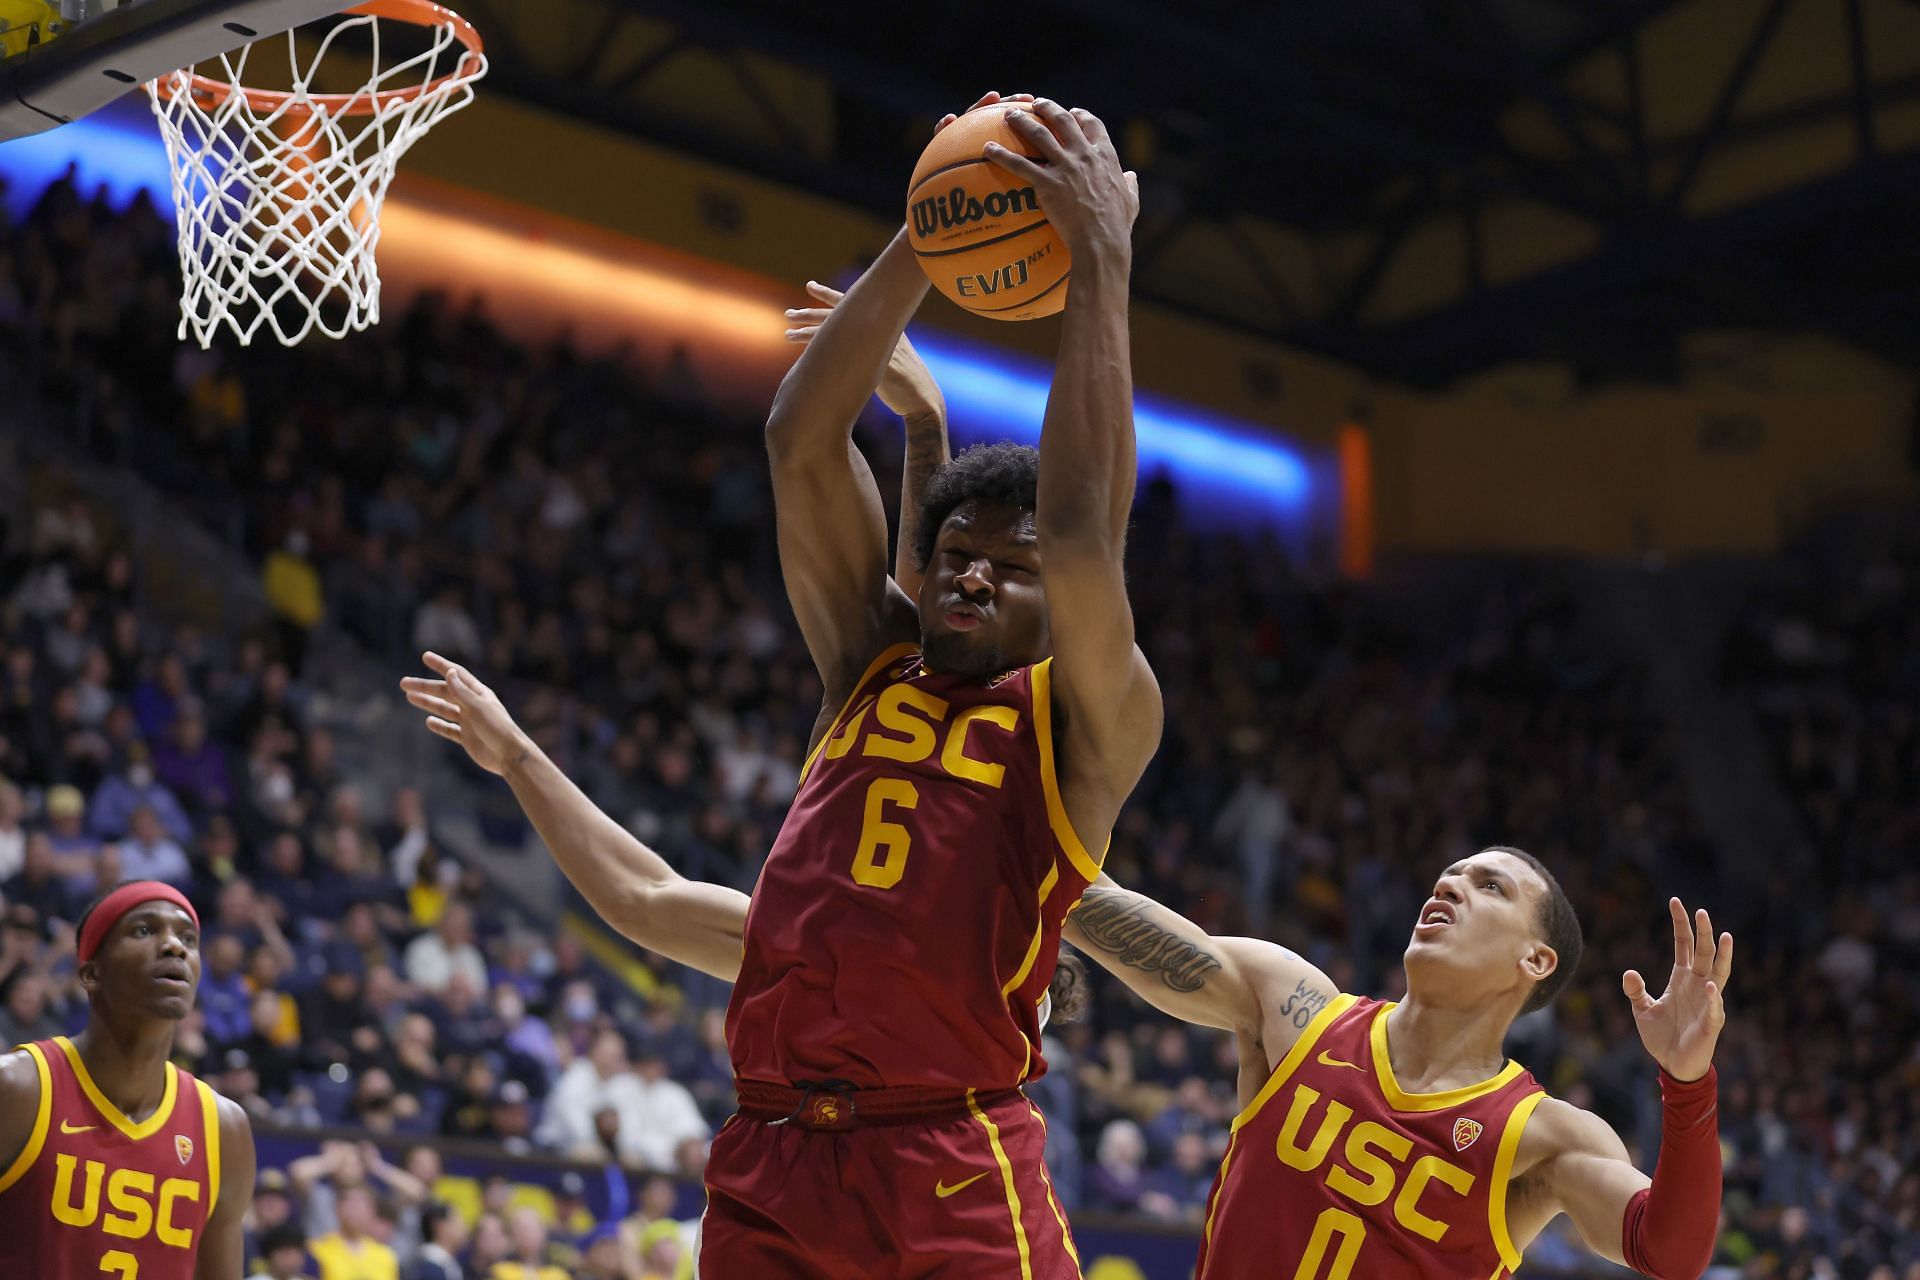 USC guard Bronny James could end up joining his famous father on the Lakers.